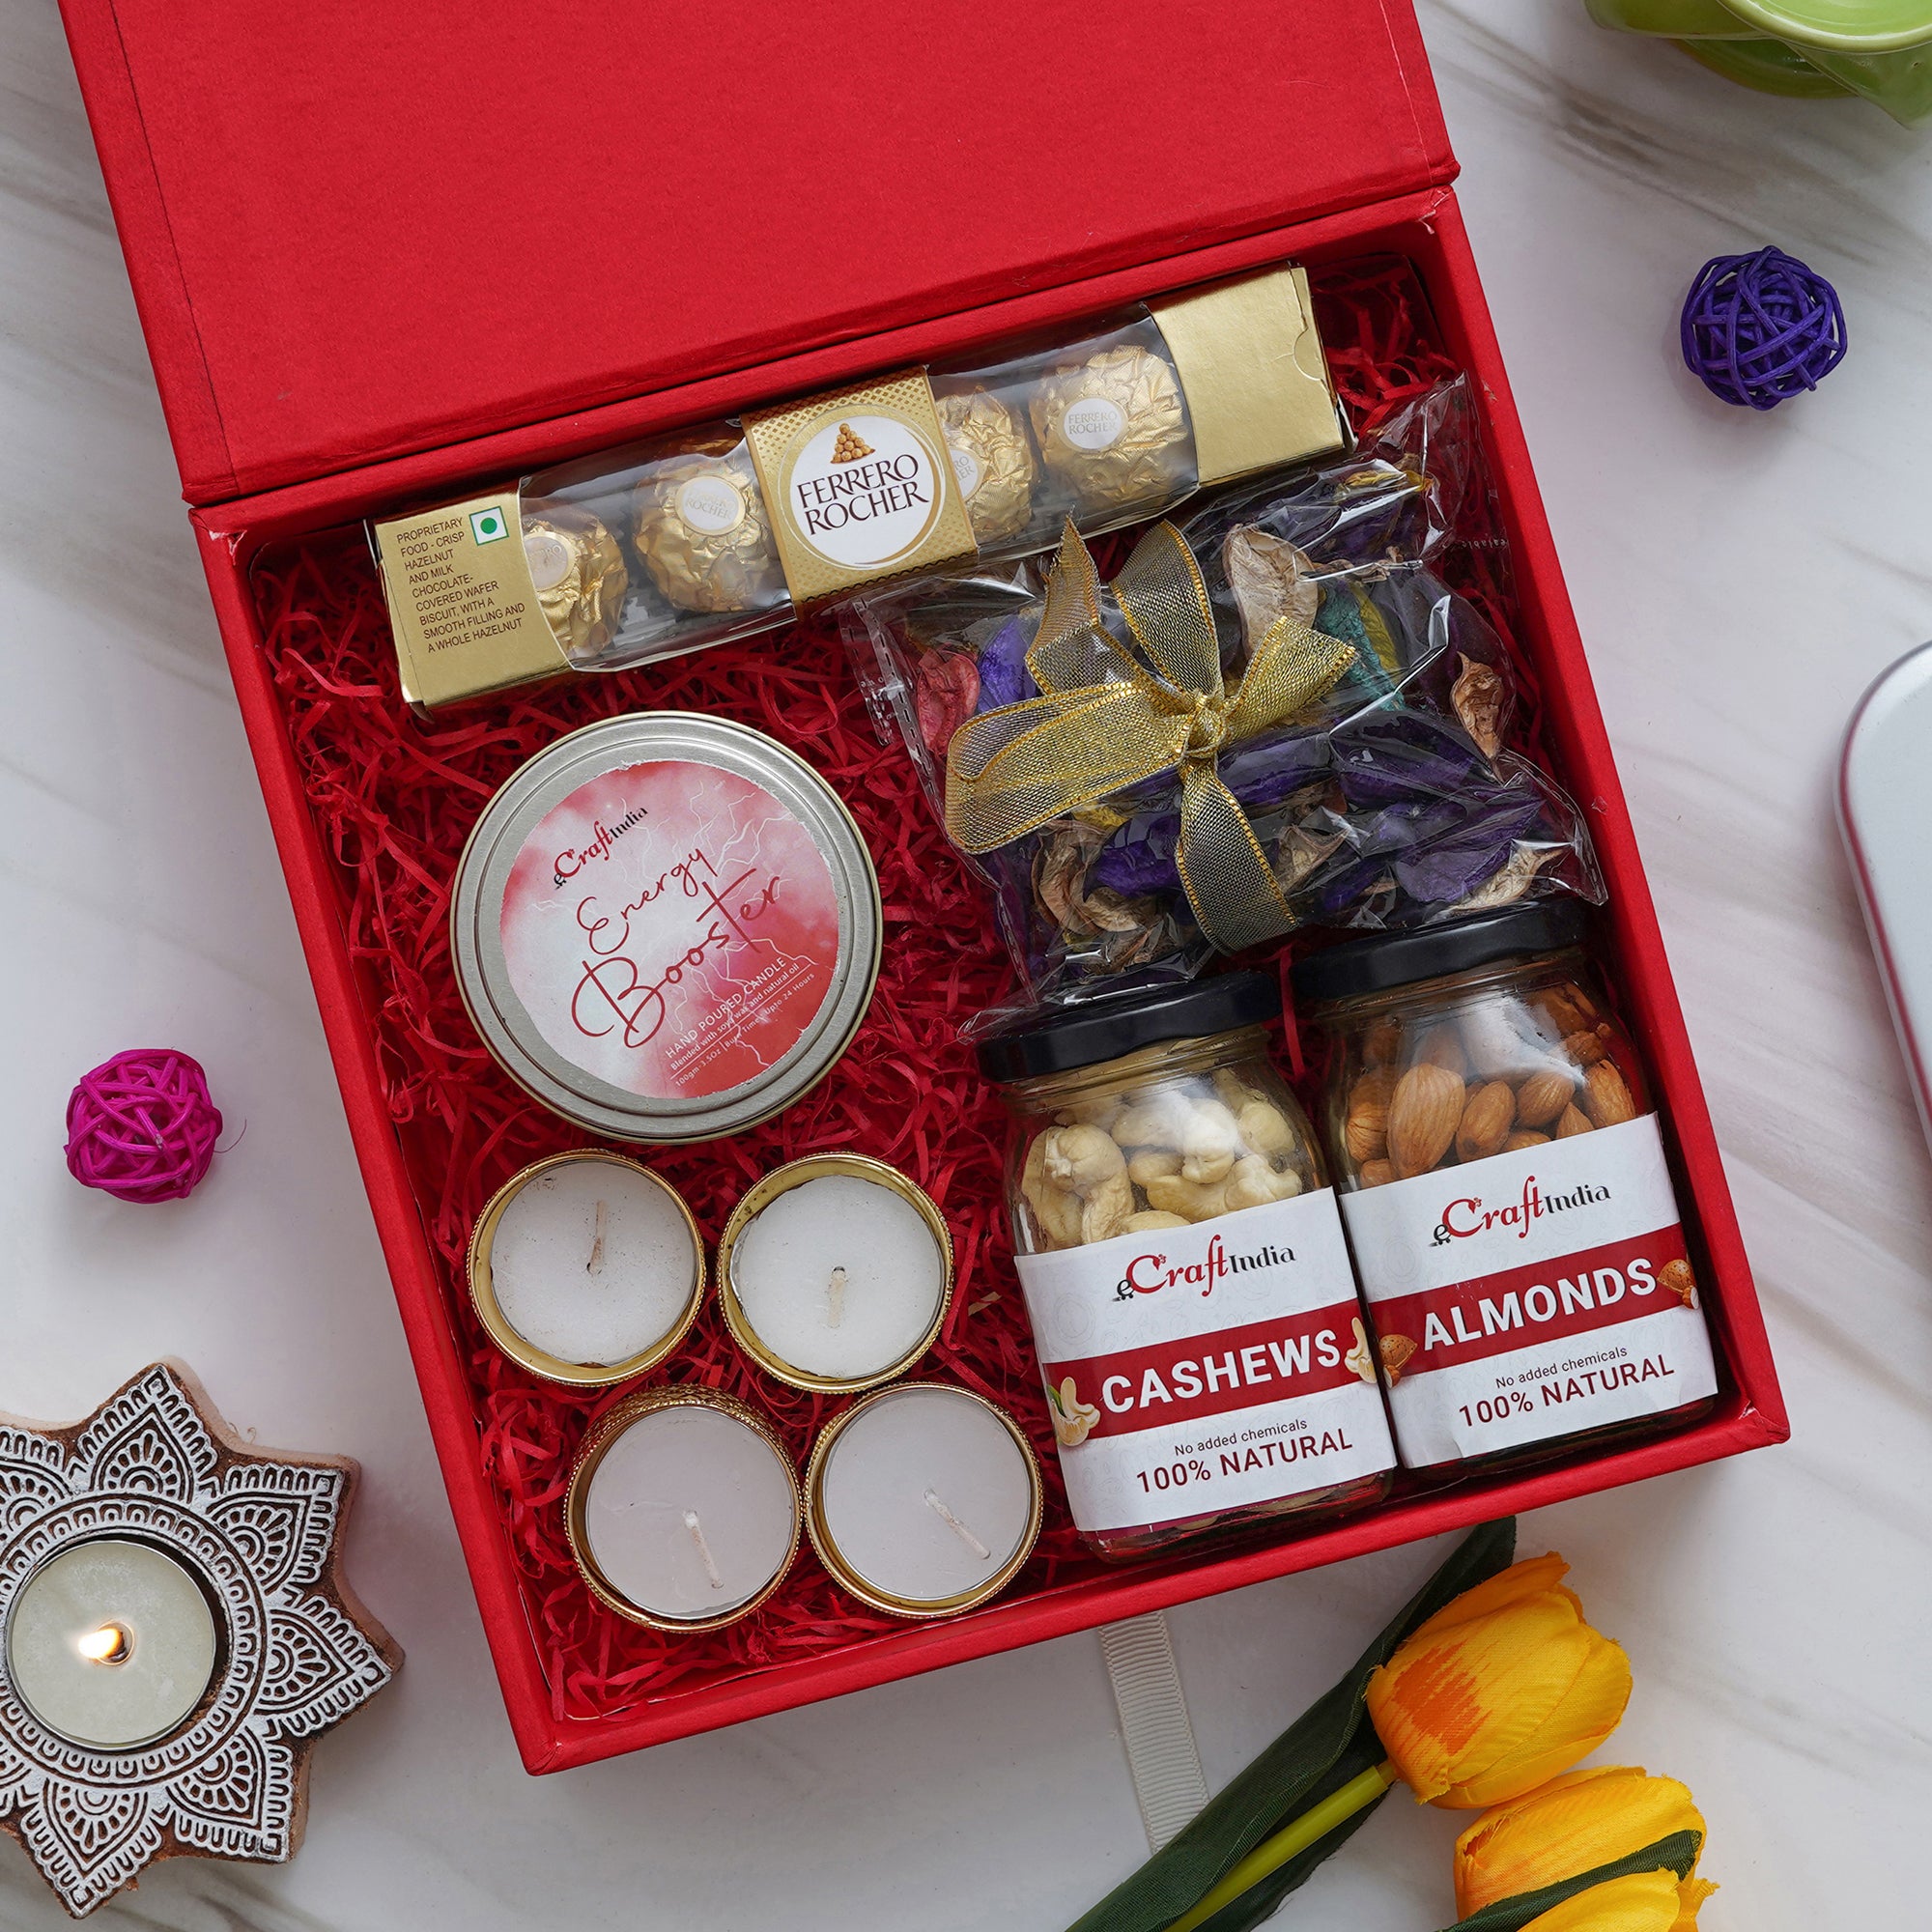 eCraftIndia A Charming Gift Box - Ferrero Rocher Chocolates (Set of 4), Set of 2 Cashews, Almonds Dry Fruits Jars (100gms Each), 4 Tea Light Candle Holders, Potpourri, Energy Booster Hand Poured Soya Wax Candle